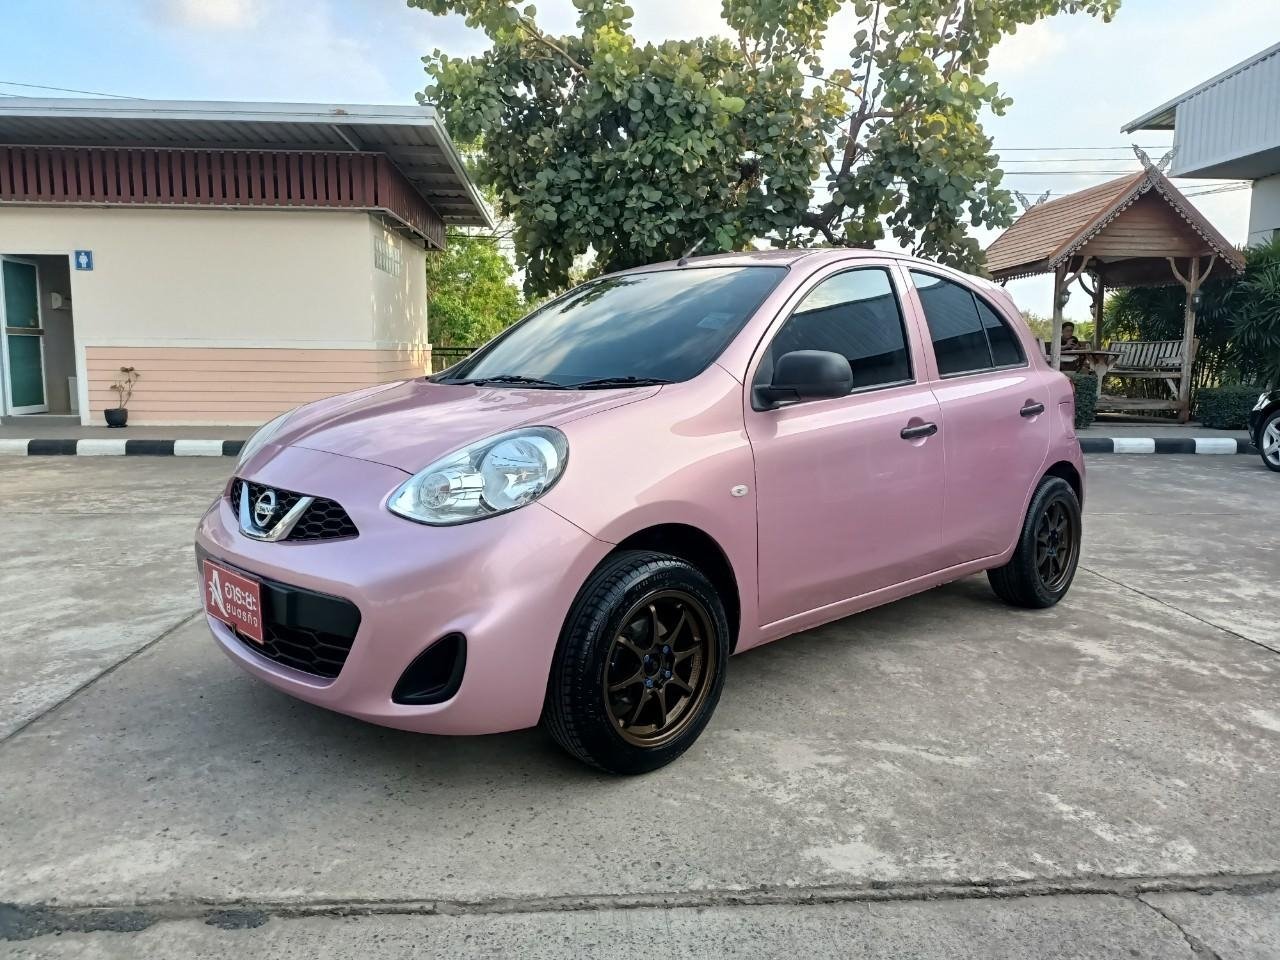 NISSAN MARCH 1.2 S M/T 2018*